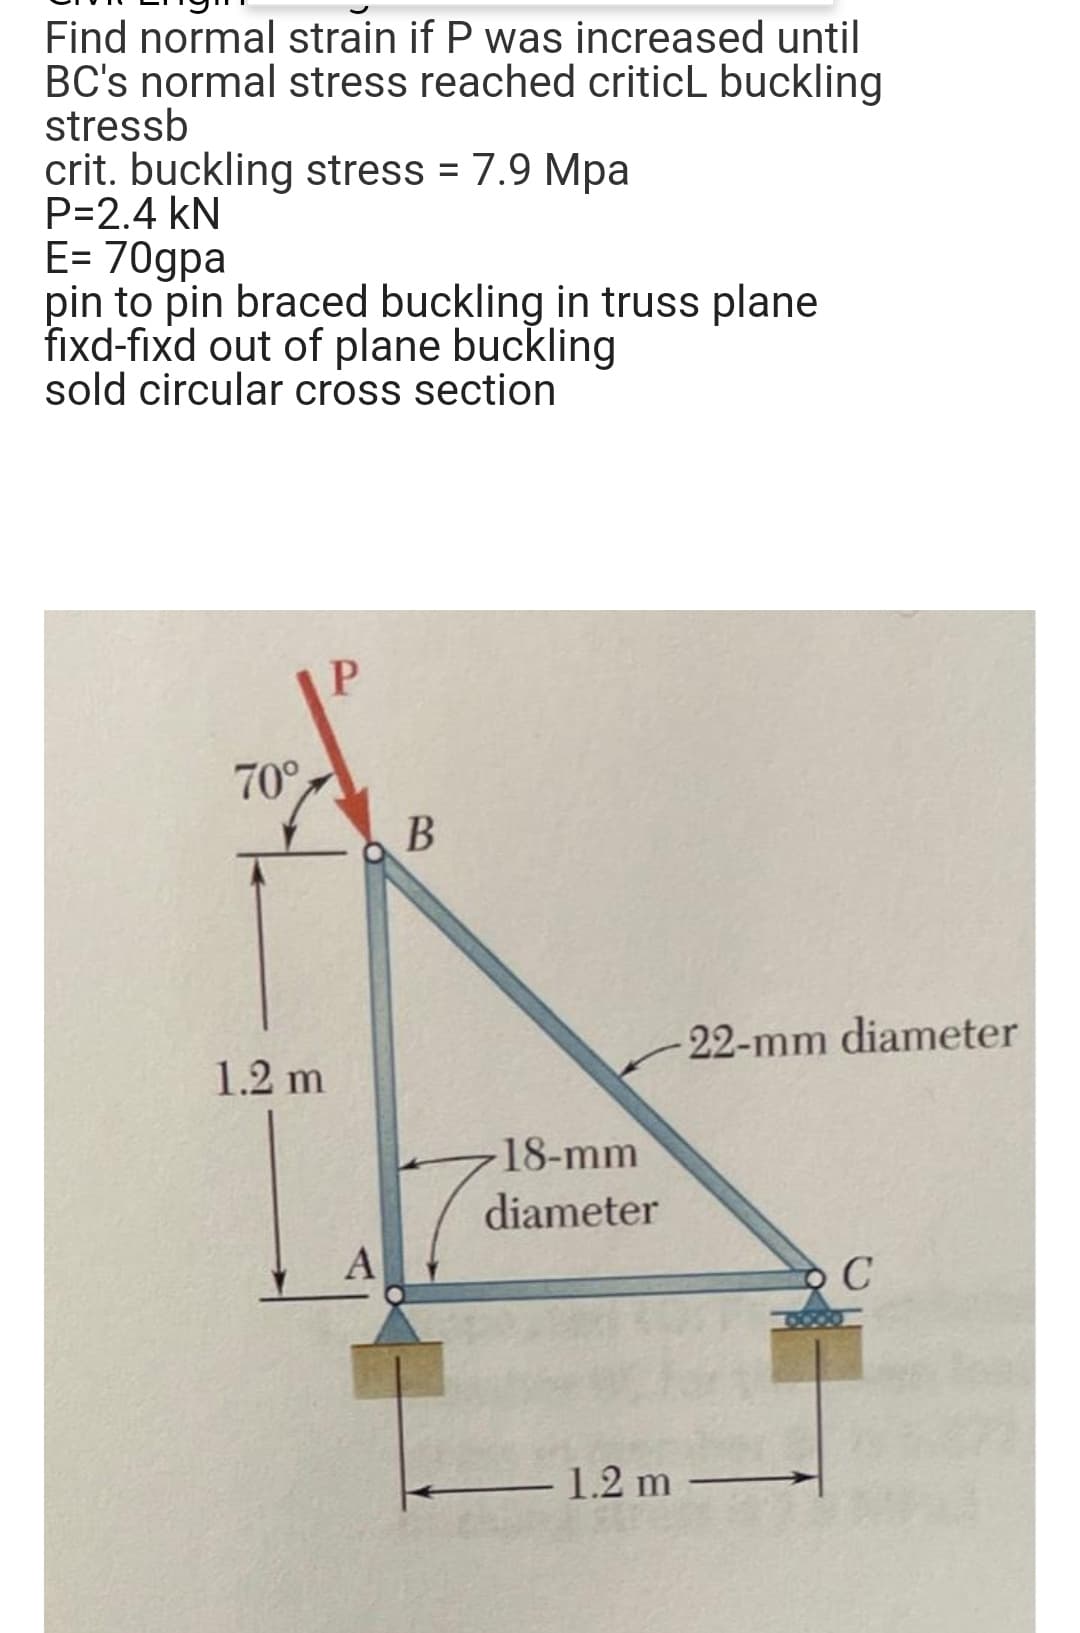 Find normal strain if P was increased until
BC's normal stress reached criticL buckling
stressb
crit. buckling stress = 7.9 Mpa
P=2.4 kN
E= 70gpa
pin to pin braced buckling in truss plane
fixd-fixd out of plane buckling
sold circular cross section
P
70°
В
22-mm diameter
1.2 m
18-mm
diameter
1.2 m
